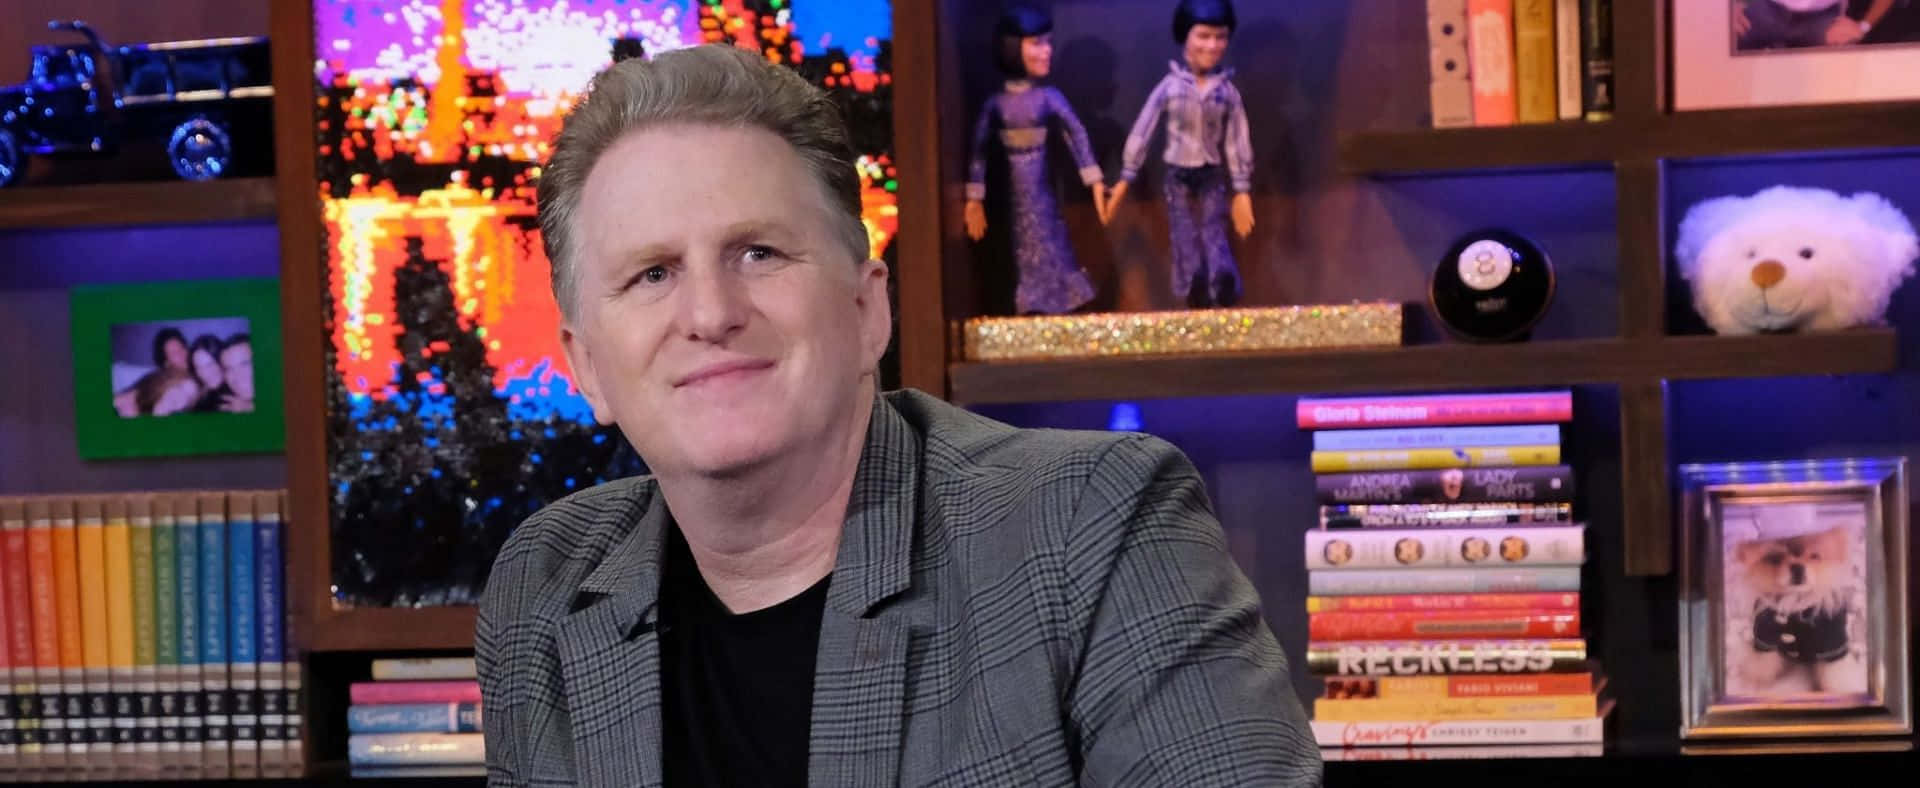 Michael Rapaport striking a confident pose on a dramatic dark background Wallpaper